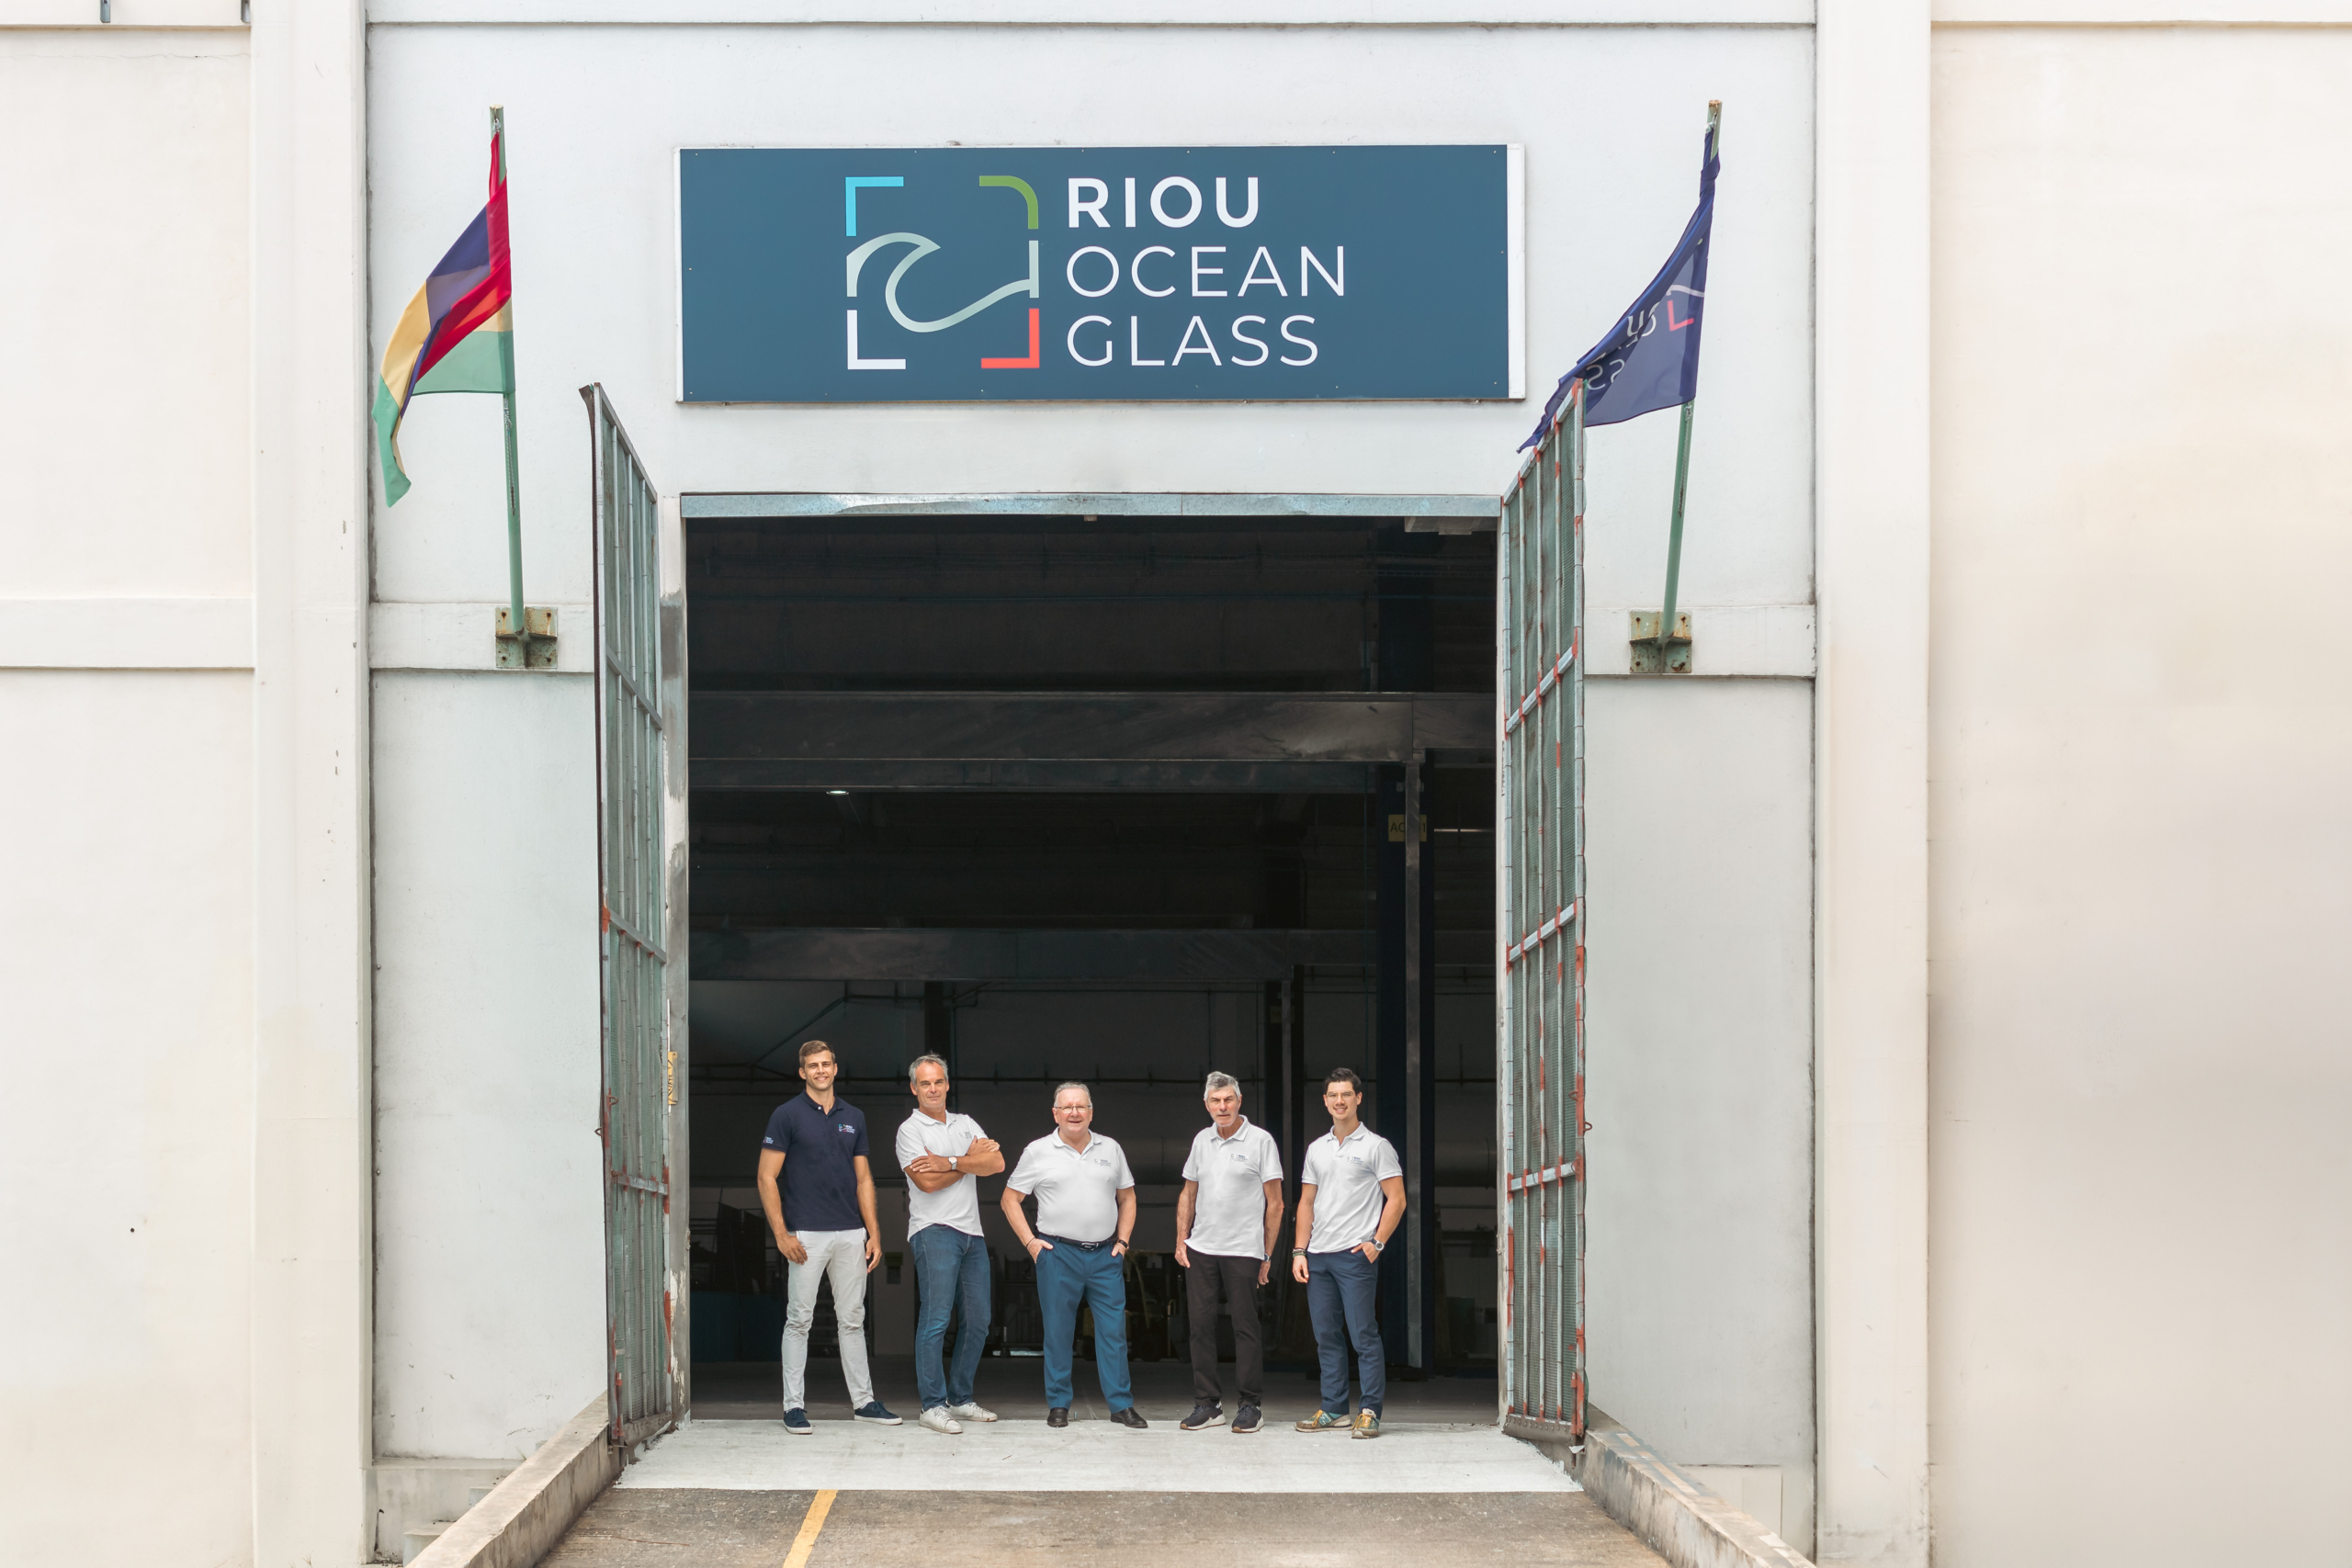 Produce Locally, Act Sustainably: RIOU OCEAN GLASS